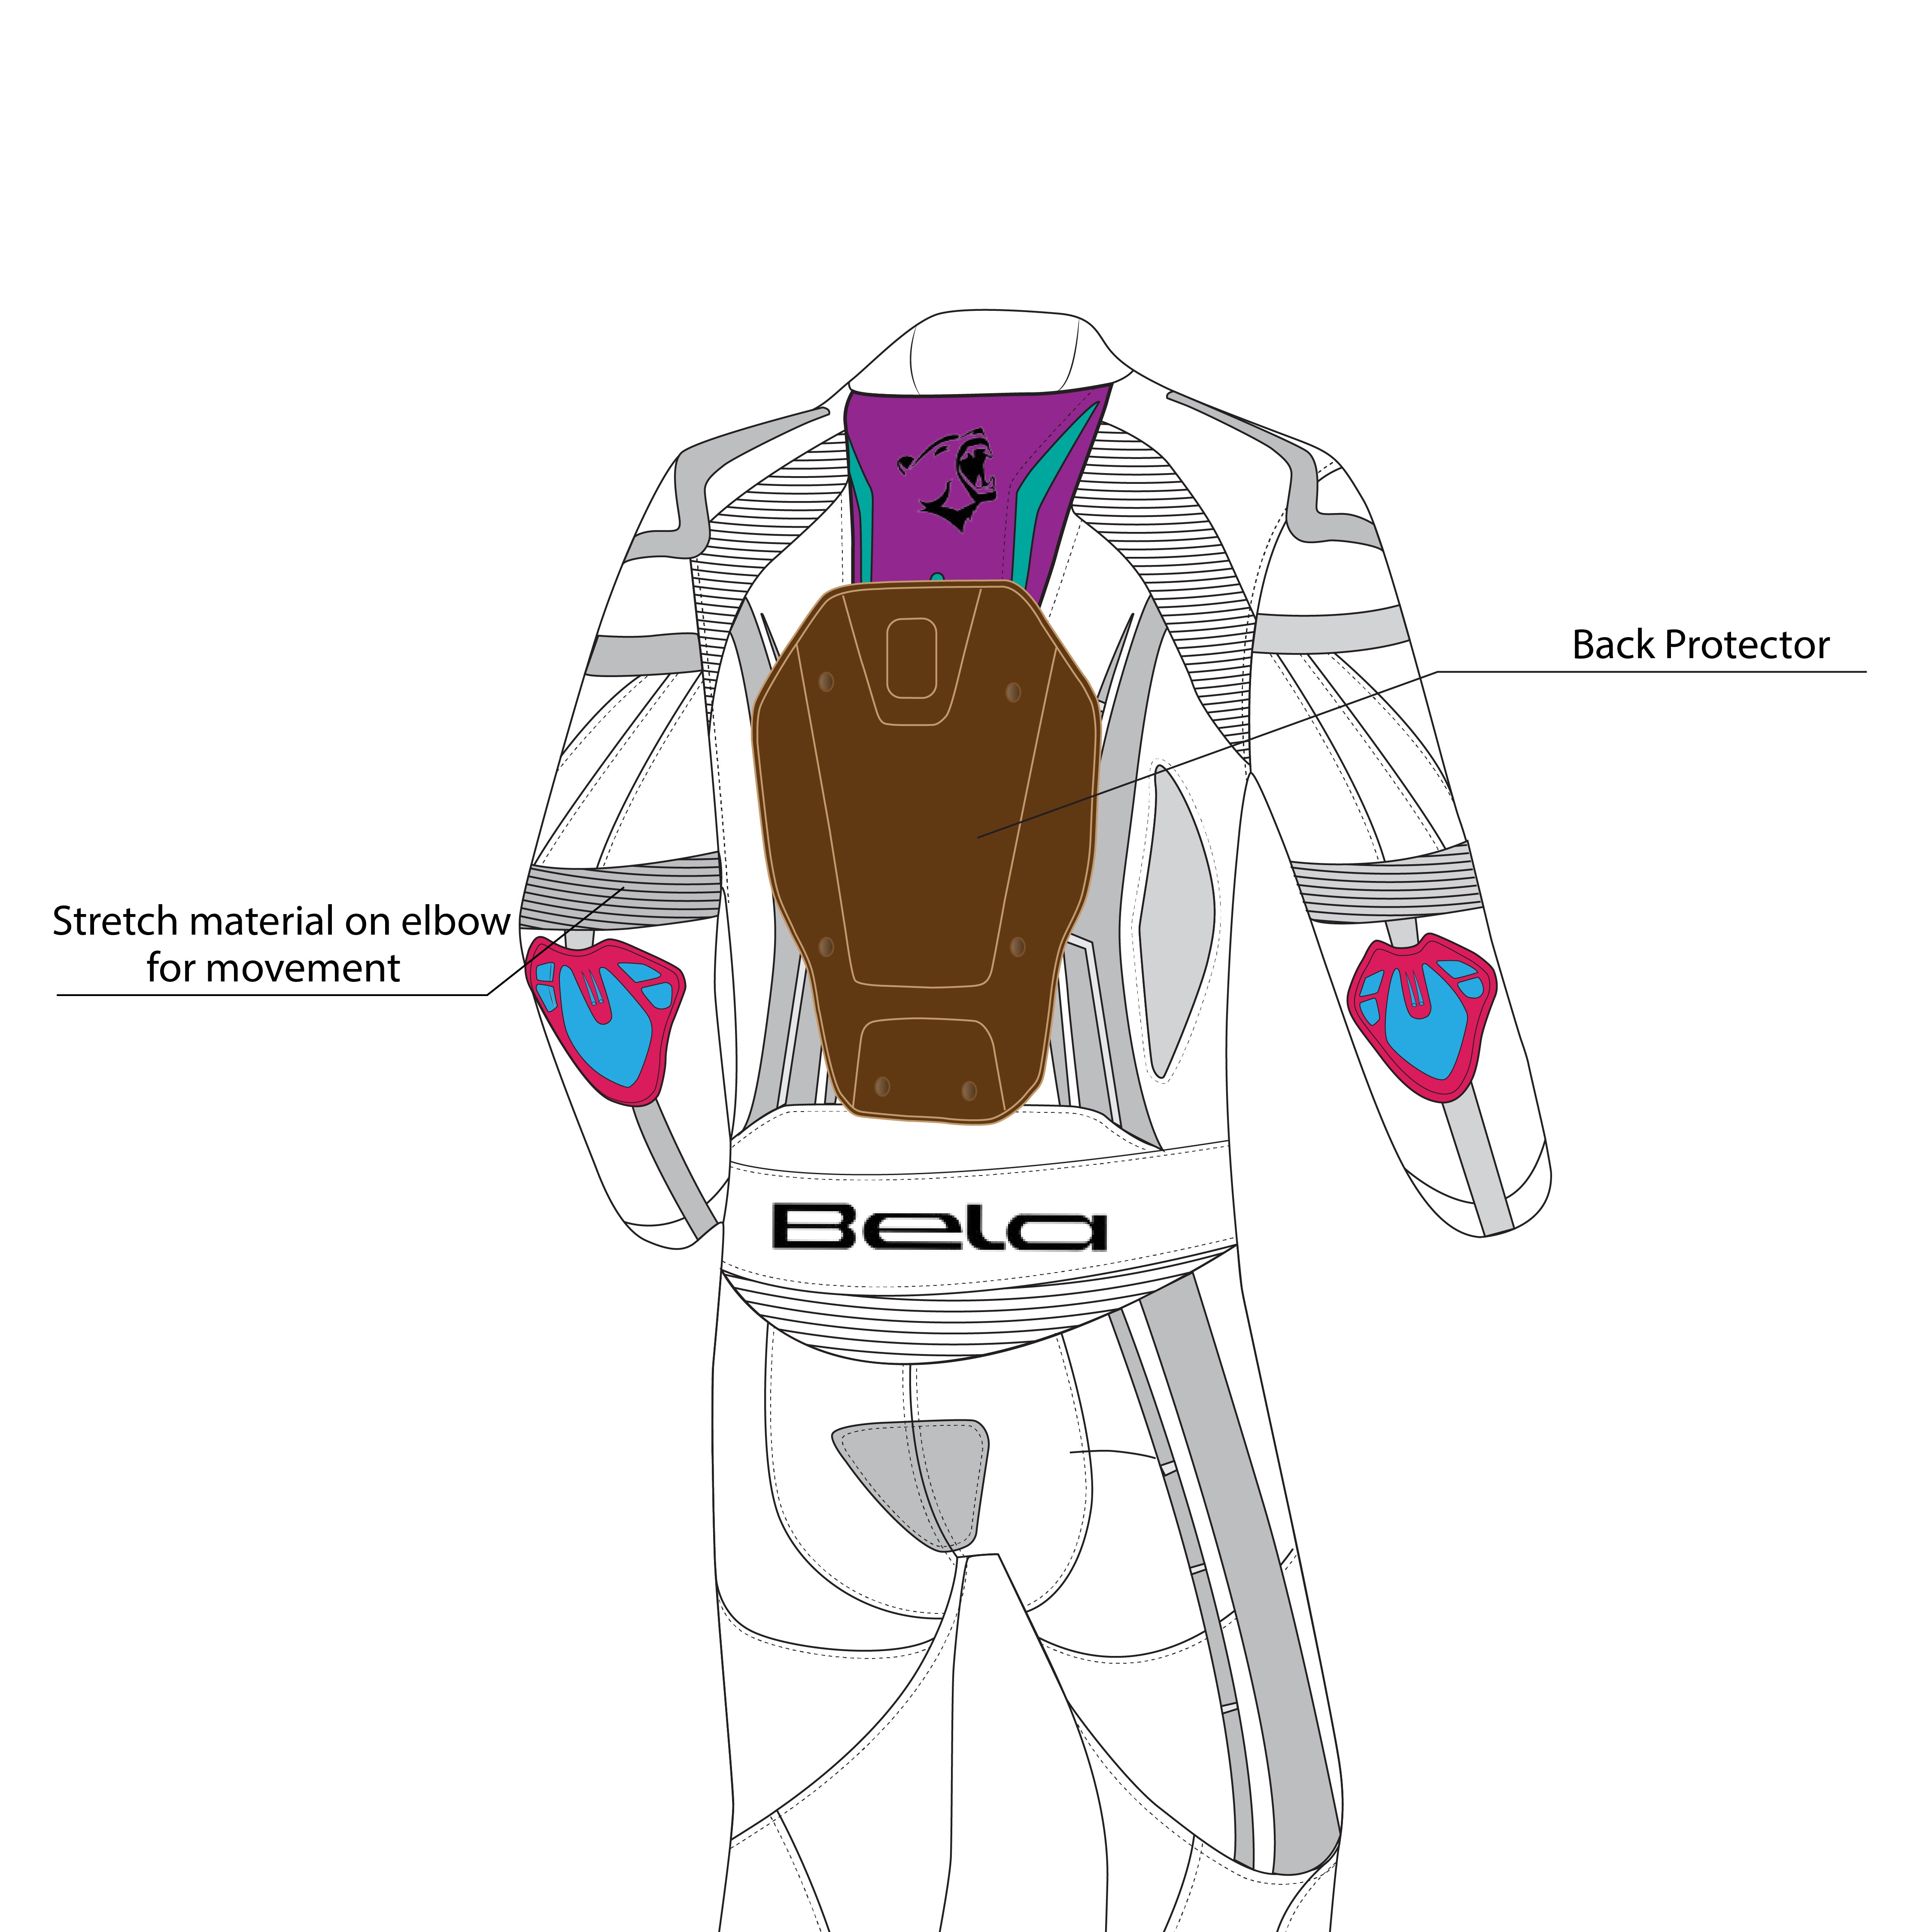 infogrpahic sketch of Bela Rocket Lady black and white 2 PC Motorcycle Racing Suit top back side view